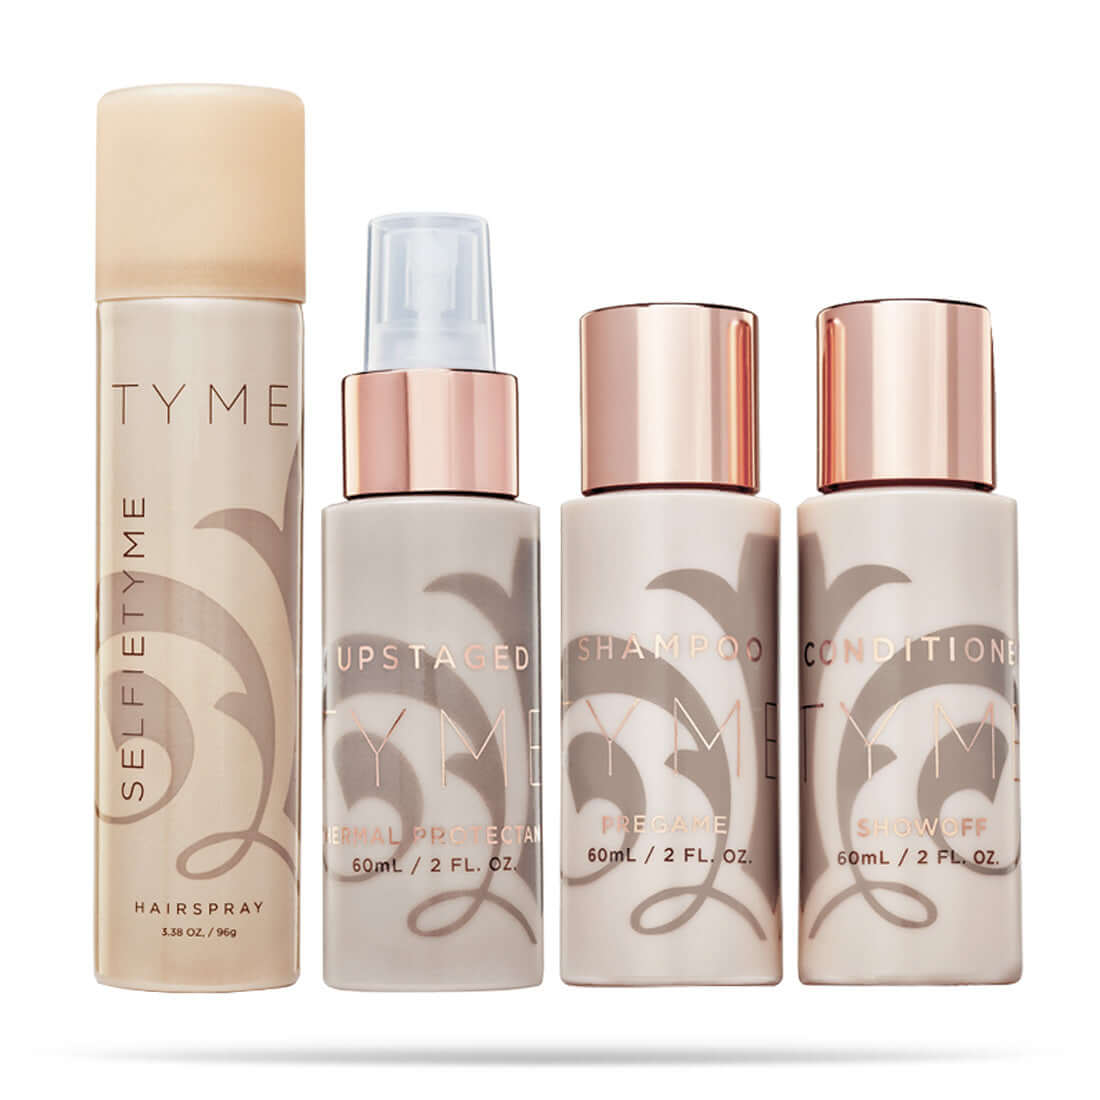 tyme ultimate travel kit TSA approved with Travel size 2 ounce TYME Pregame Shampoo and Showoff Conditioner in a beige bottles with rose gold details, travel hairspray, and travel thermal protectant